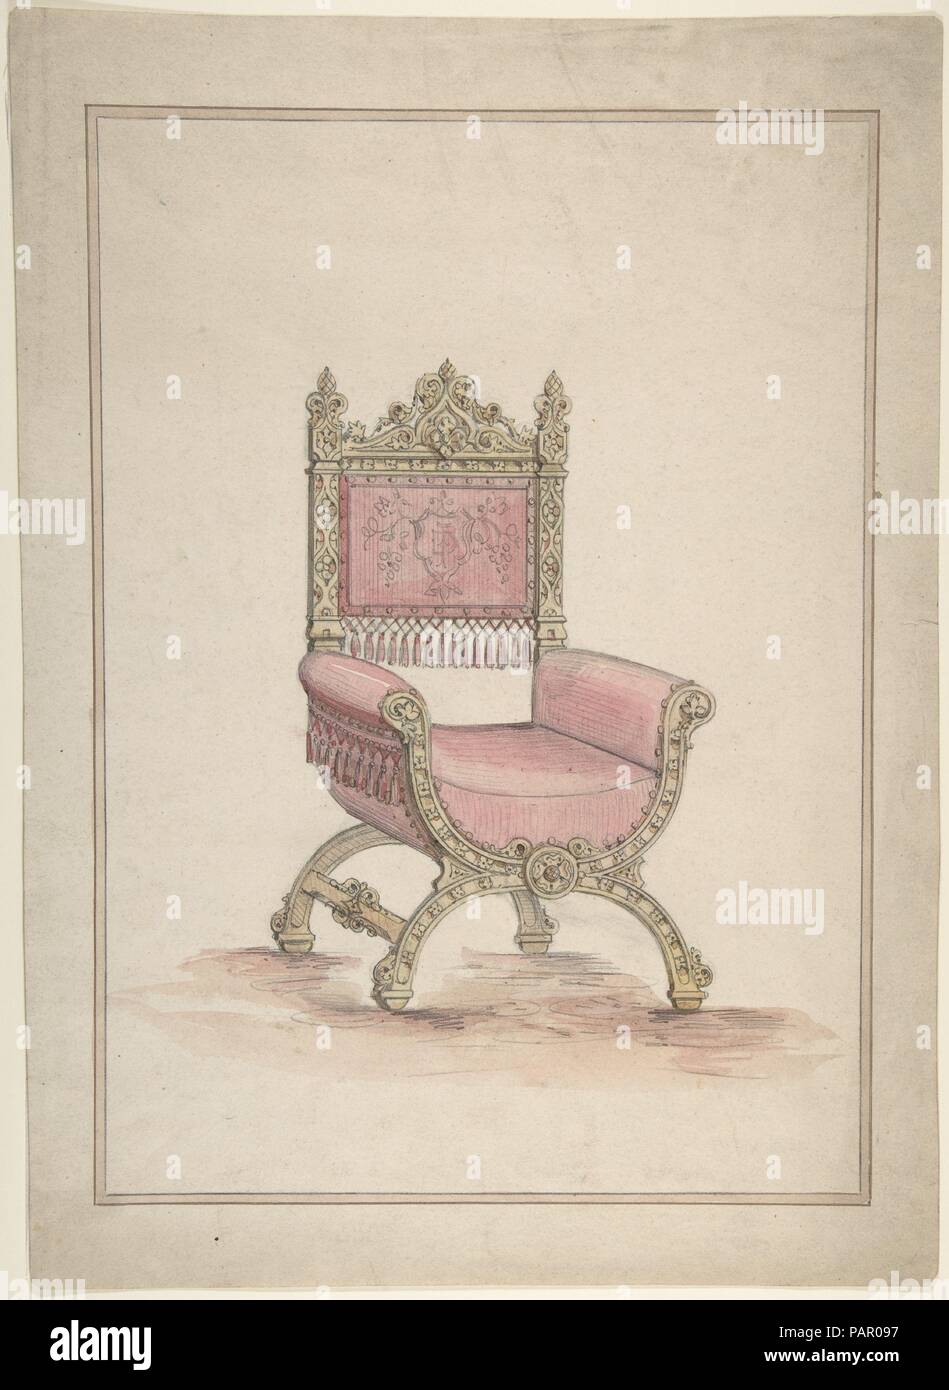 Gothic Style Chair. Artist: Anonymous, British, 19th century. Dimensions: sheet: 14 3/4 x 10 3/4 in. (37.5 x 27.3 cm). Date: 19th century. Museum: Metropolitan Museum of Art, New York, USA. Stock Photo